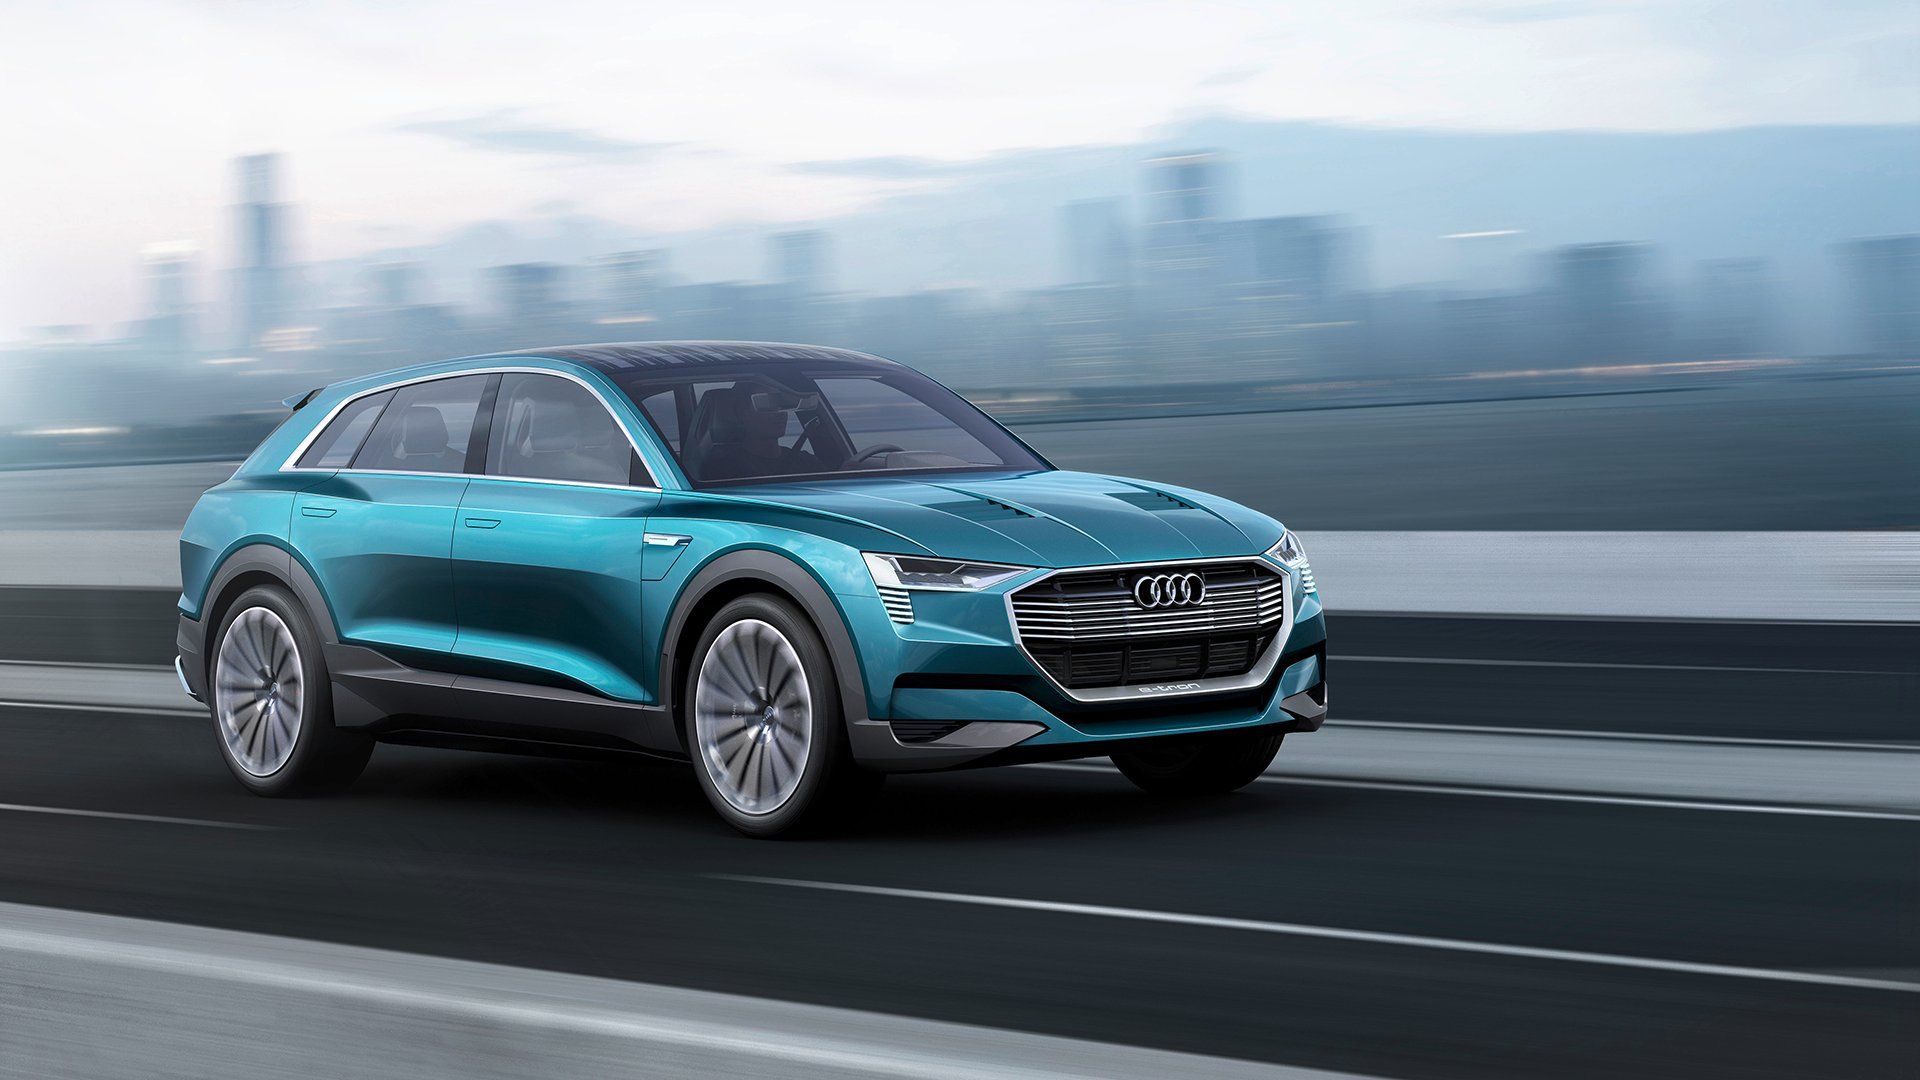 Audi to Launch an Electric Vehicle Model Every Year Starting in 2018